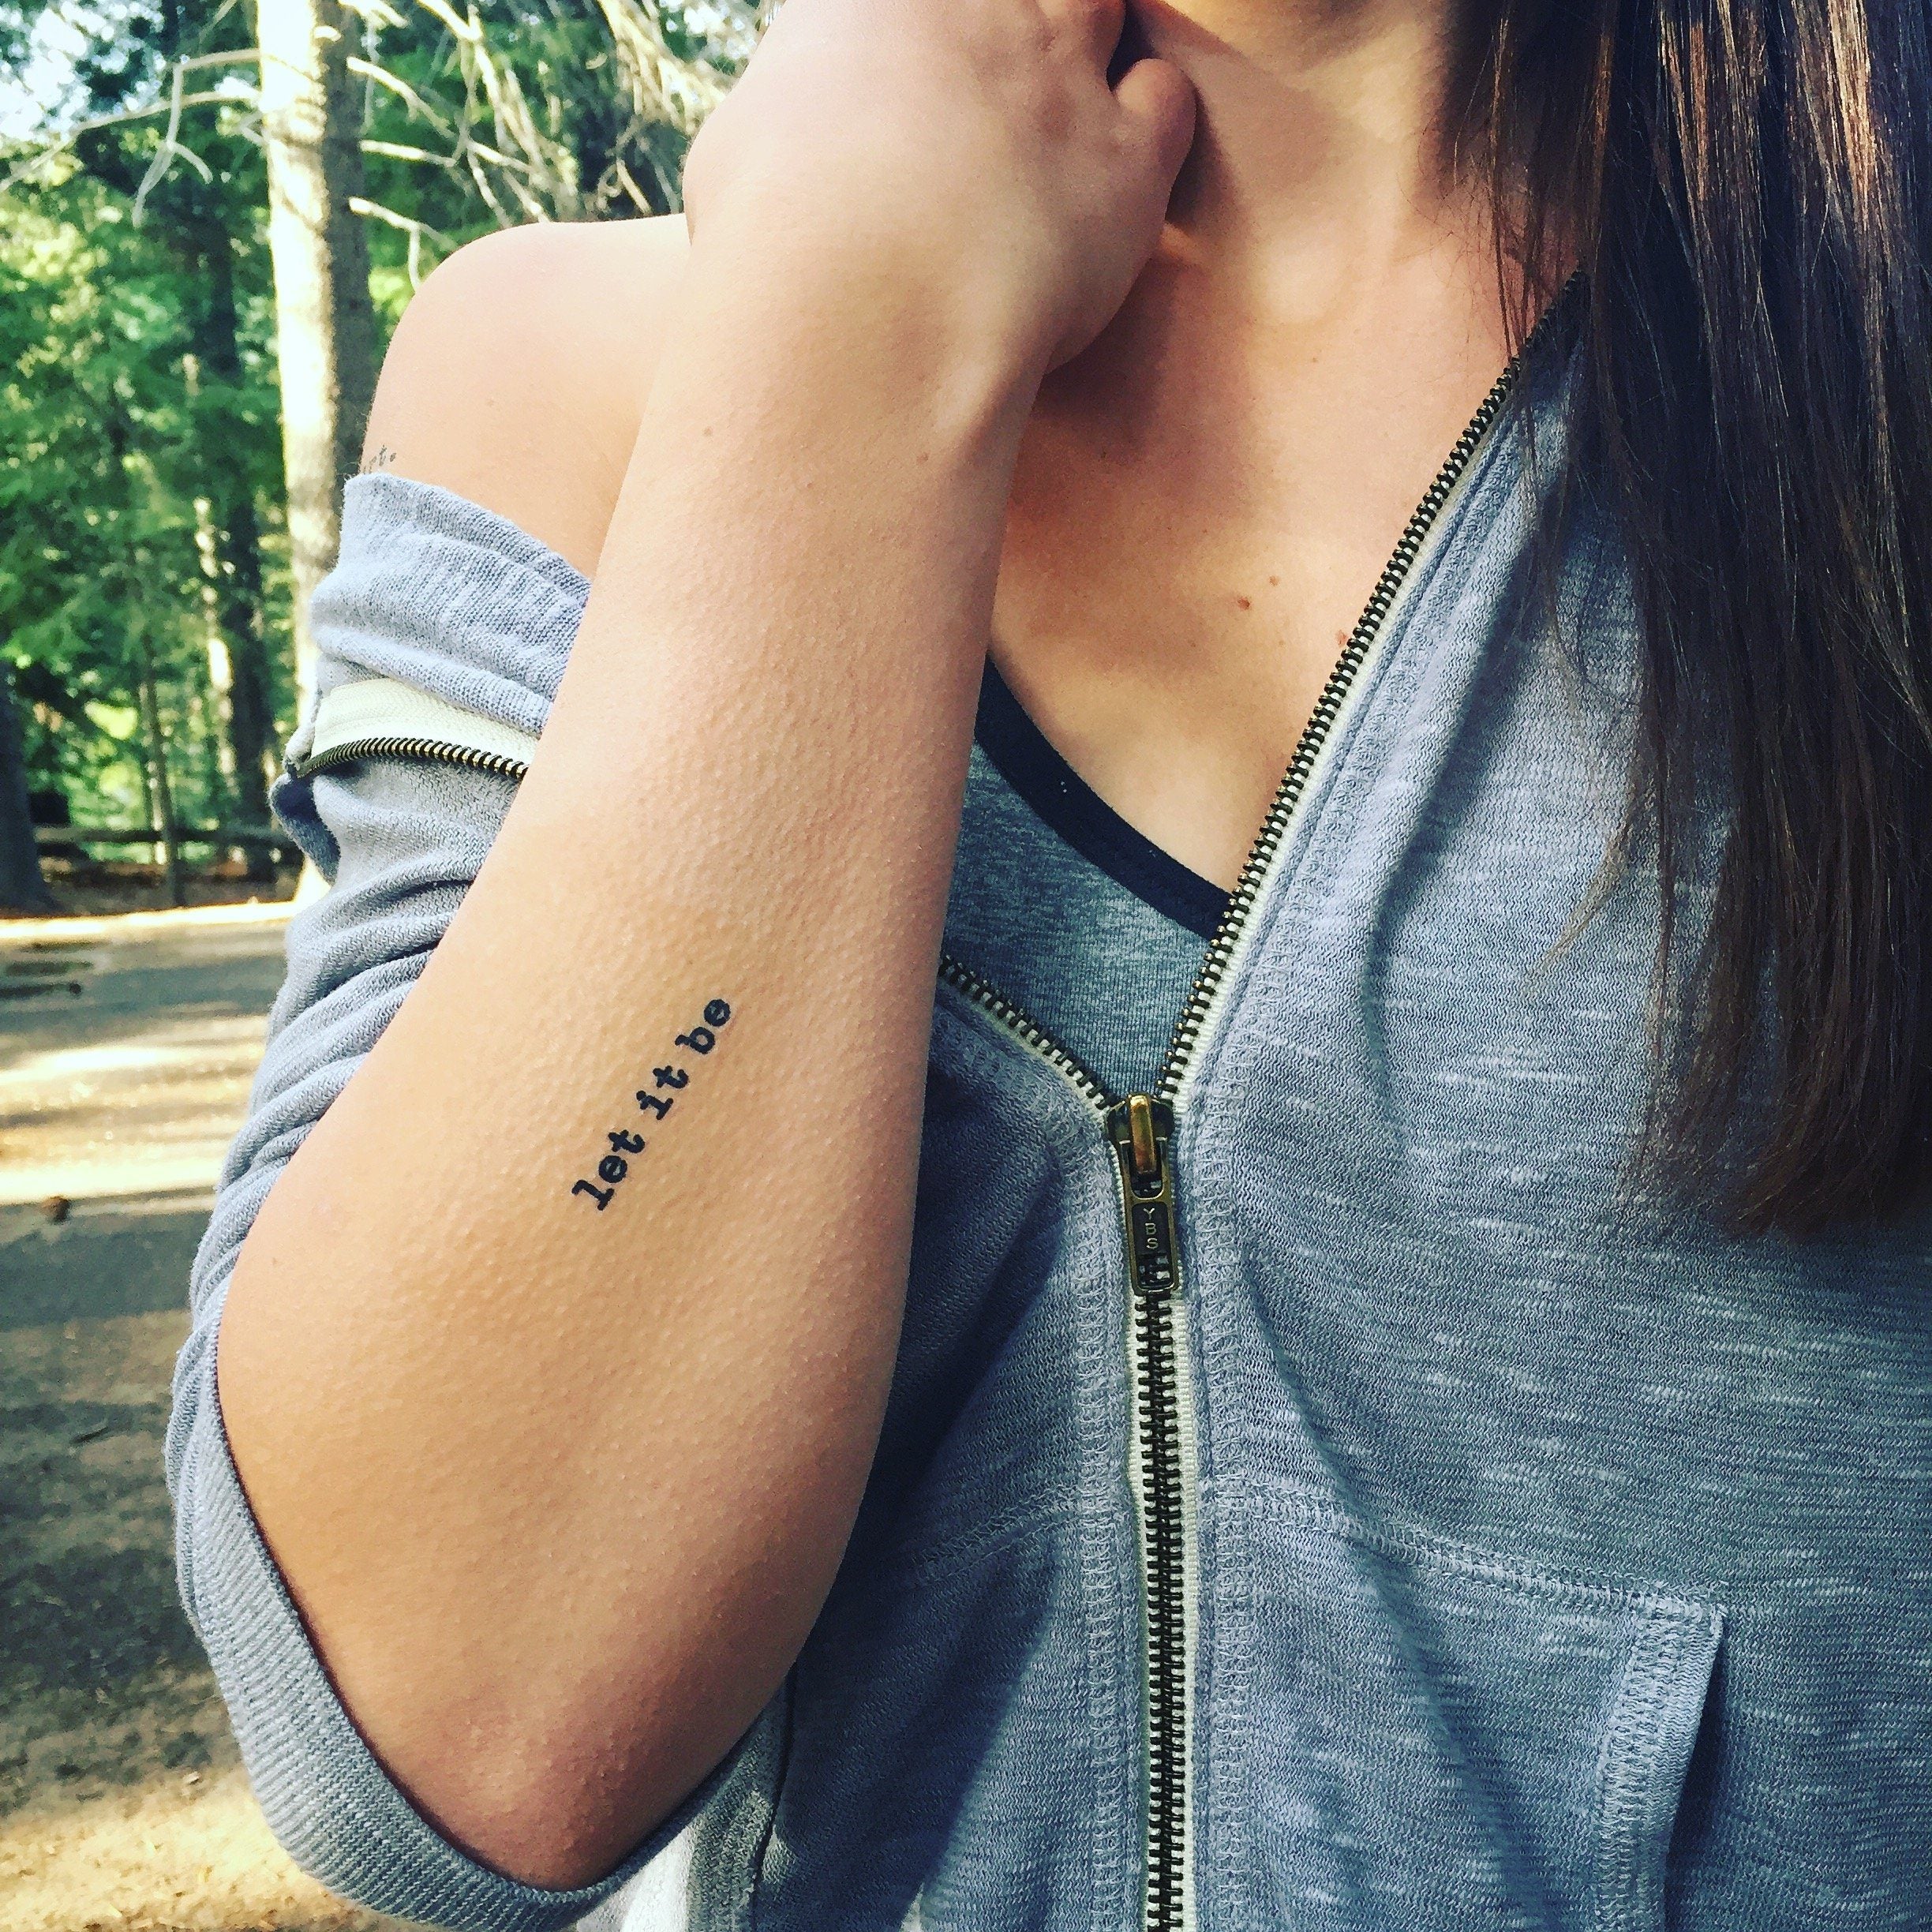 31 Meaningful Quotes That Look Lovely as Tattoos  CafeMomcom